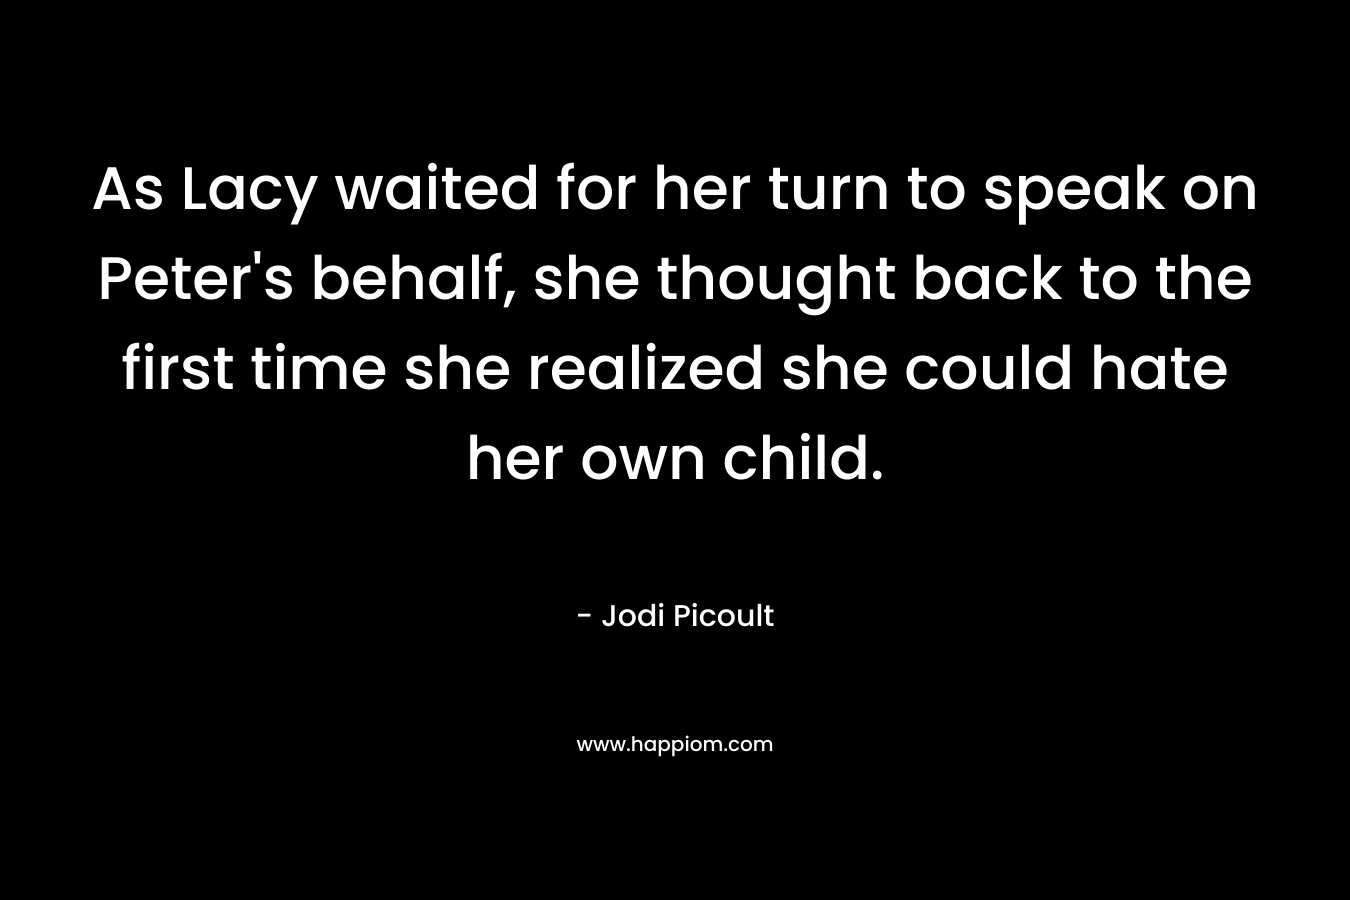 As Lacy waited for her turn to speak on Peter’s behalf, she thought back to the first time she realized she could hate her own child. – Jodi Picoult